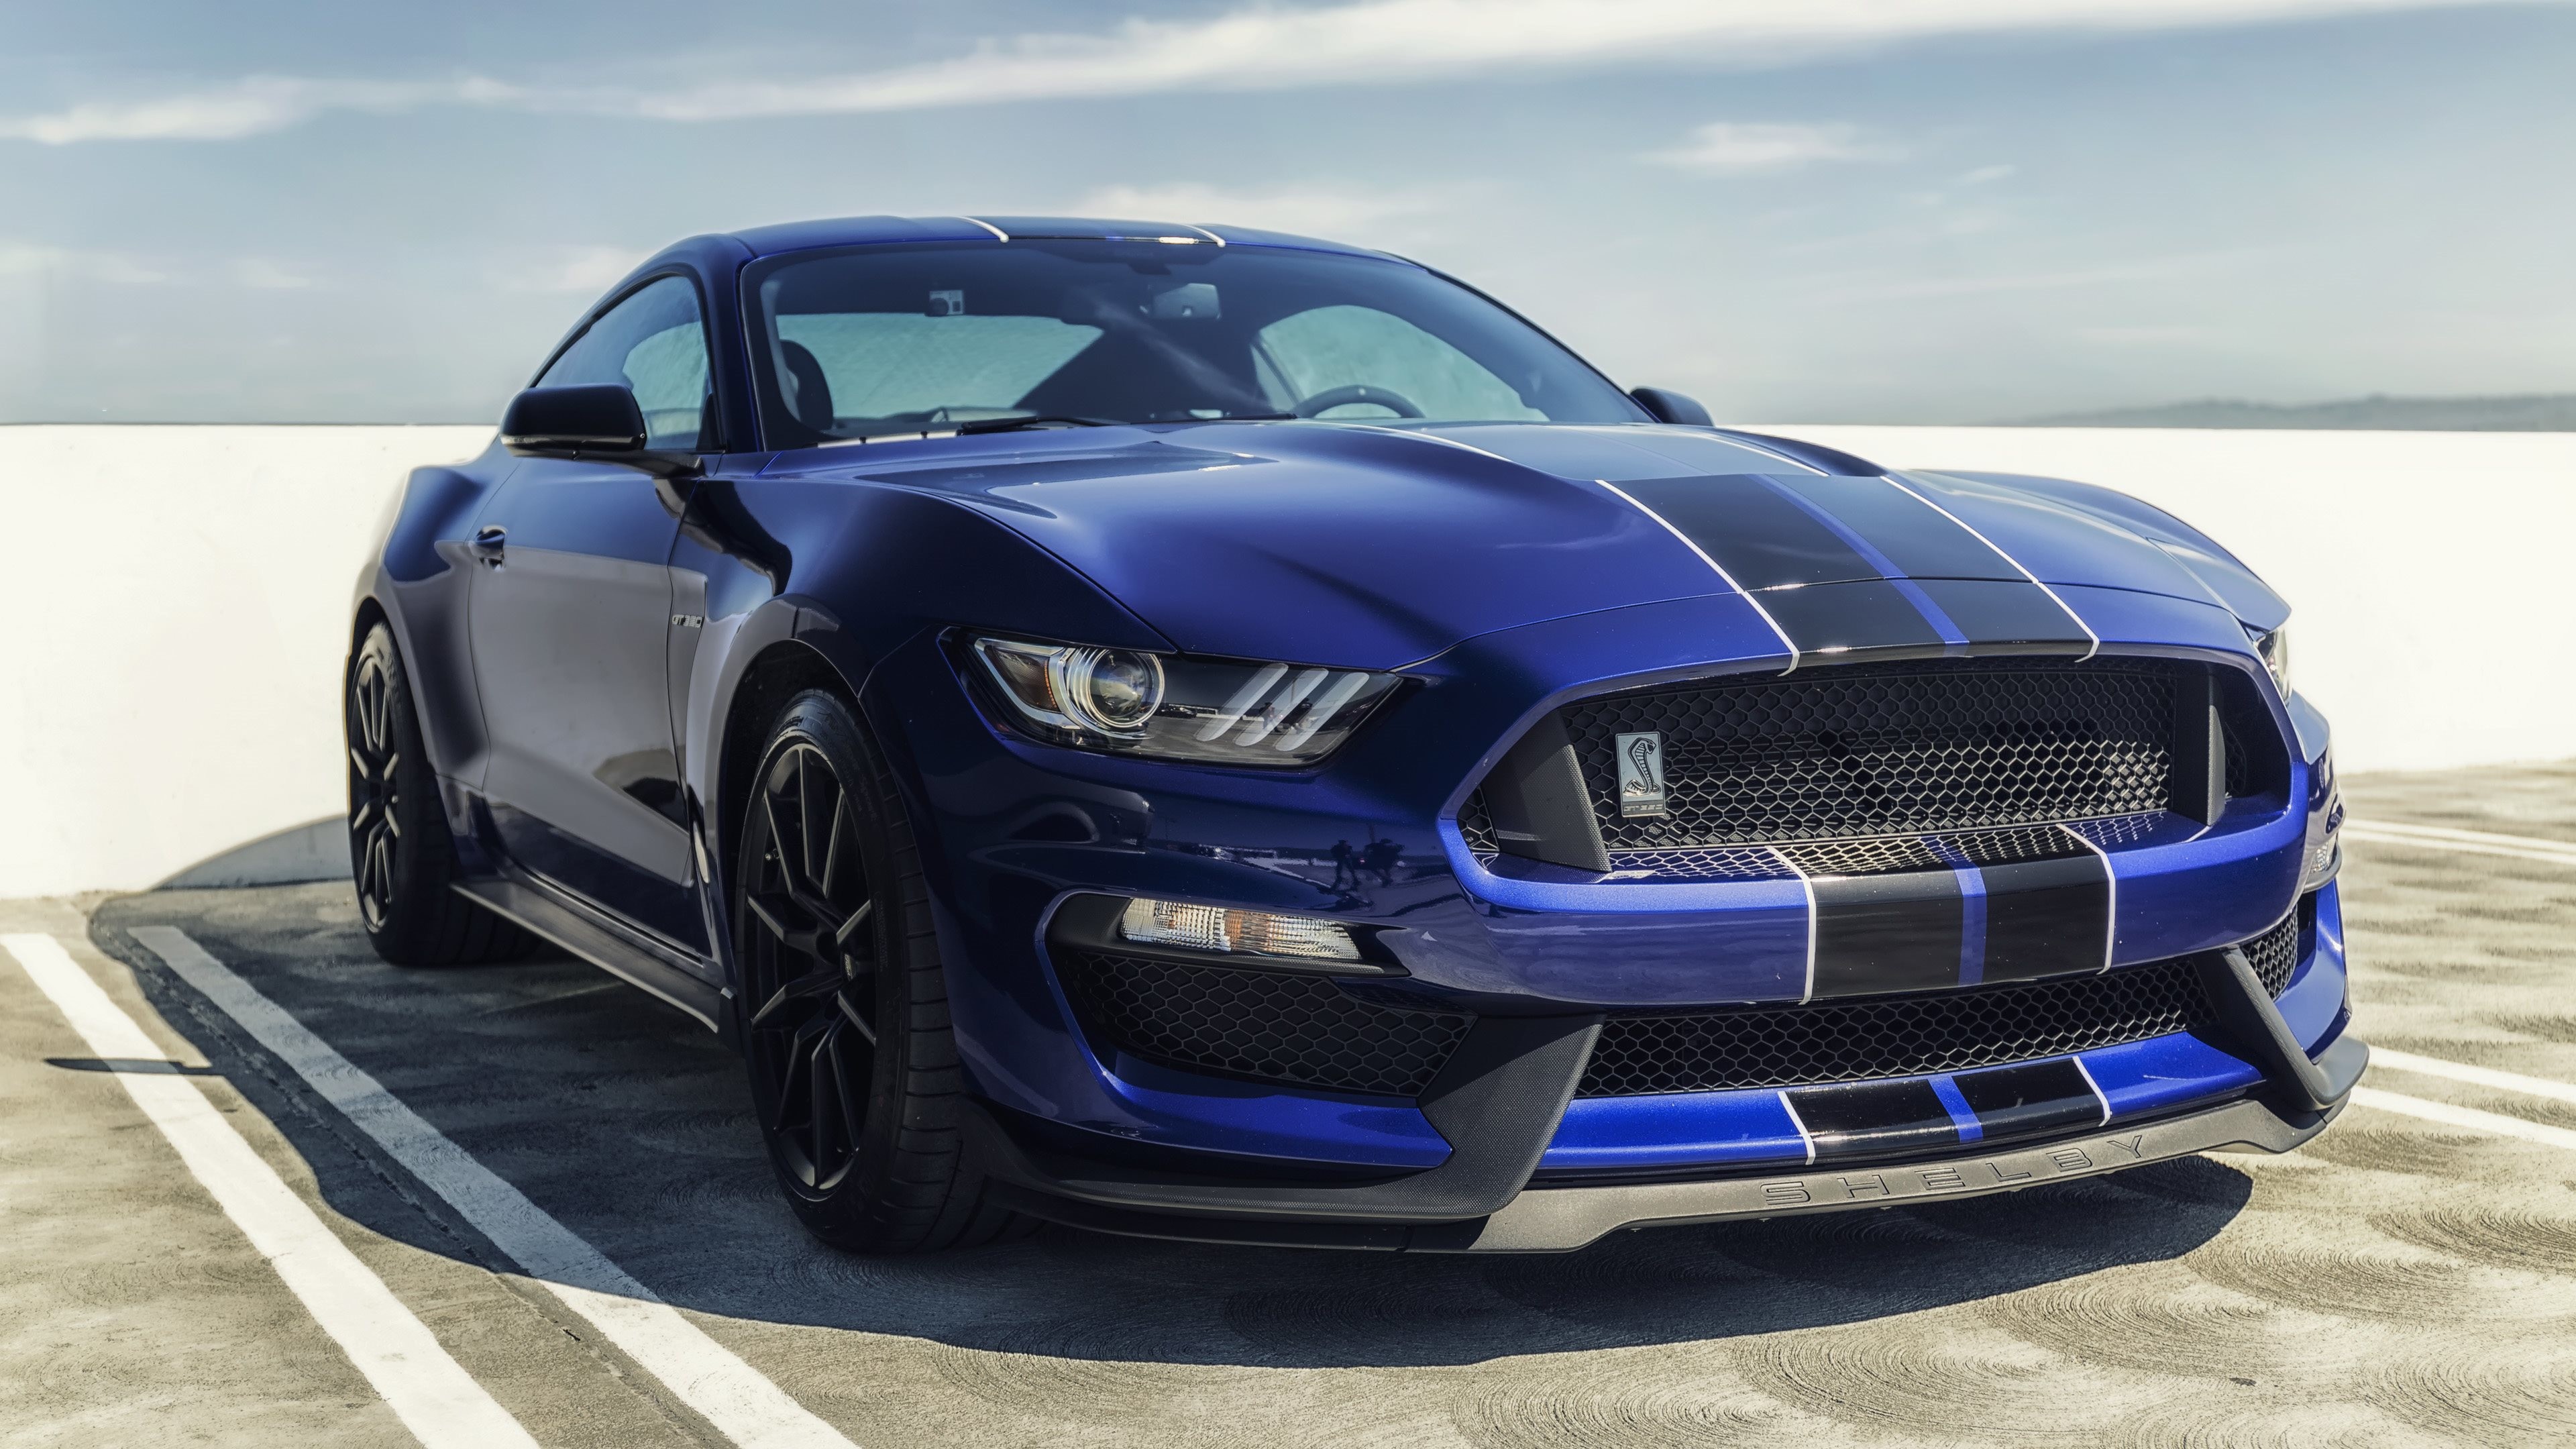 Ford Mustang Shelby Gt350 Blue Mustang Sports Cars - Ford Mustang Wallpaper 4k Download - HD Wallpaper 